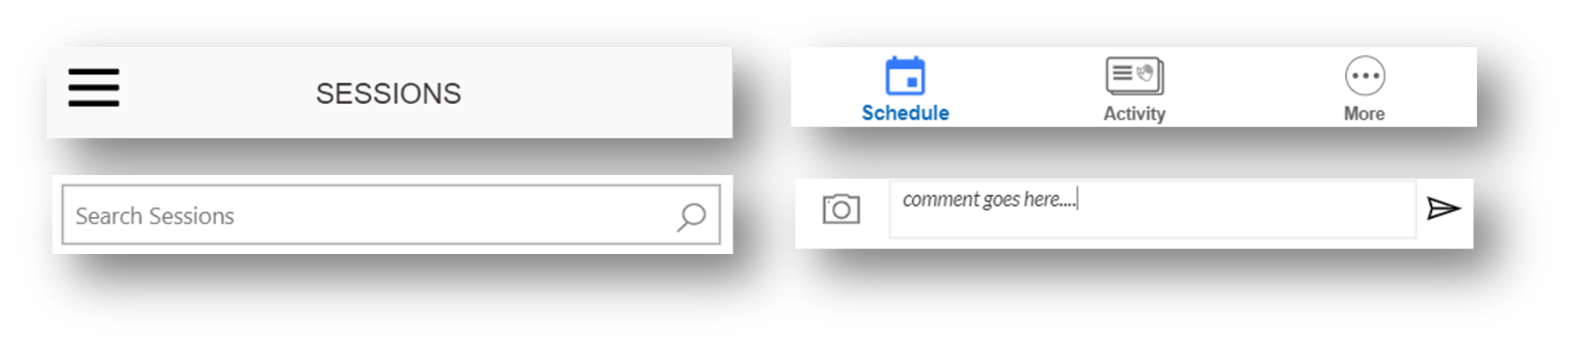 Screenshot of components in canvas apps like Sessions, Schedule, and Activity.